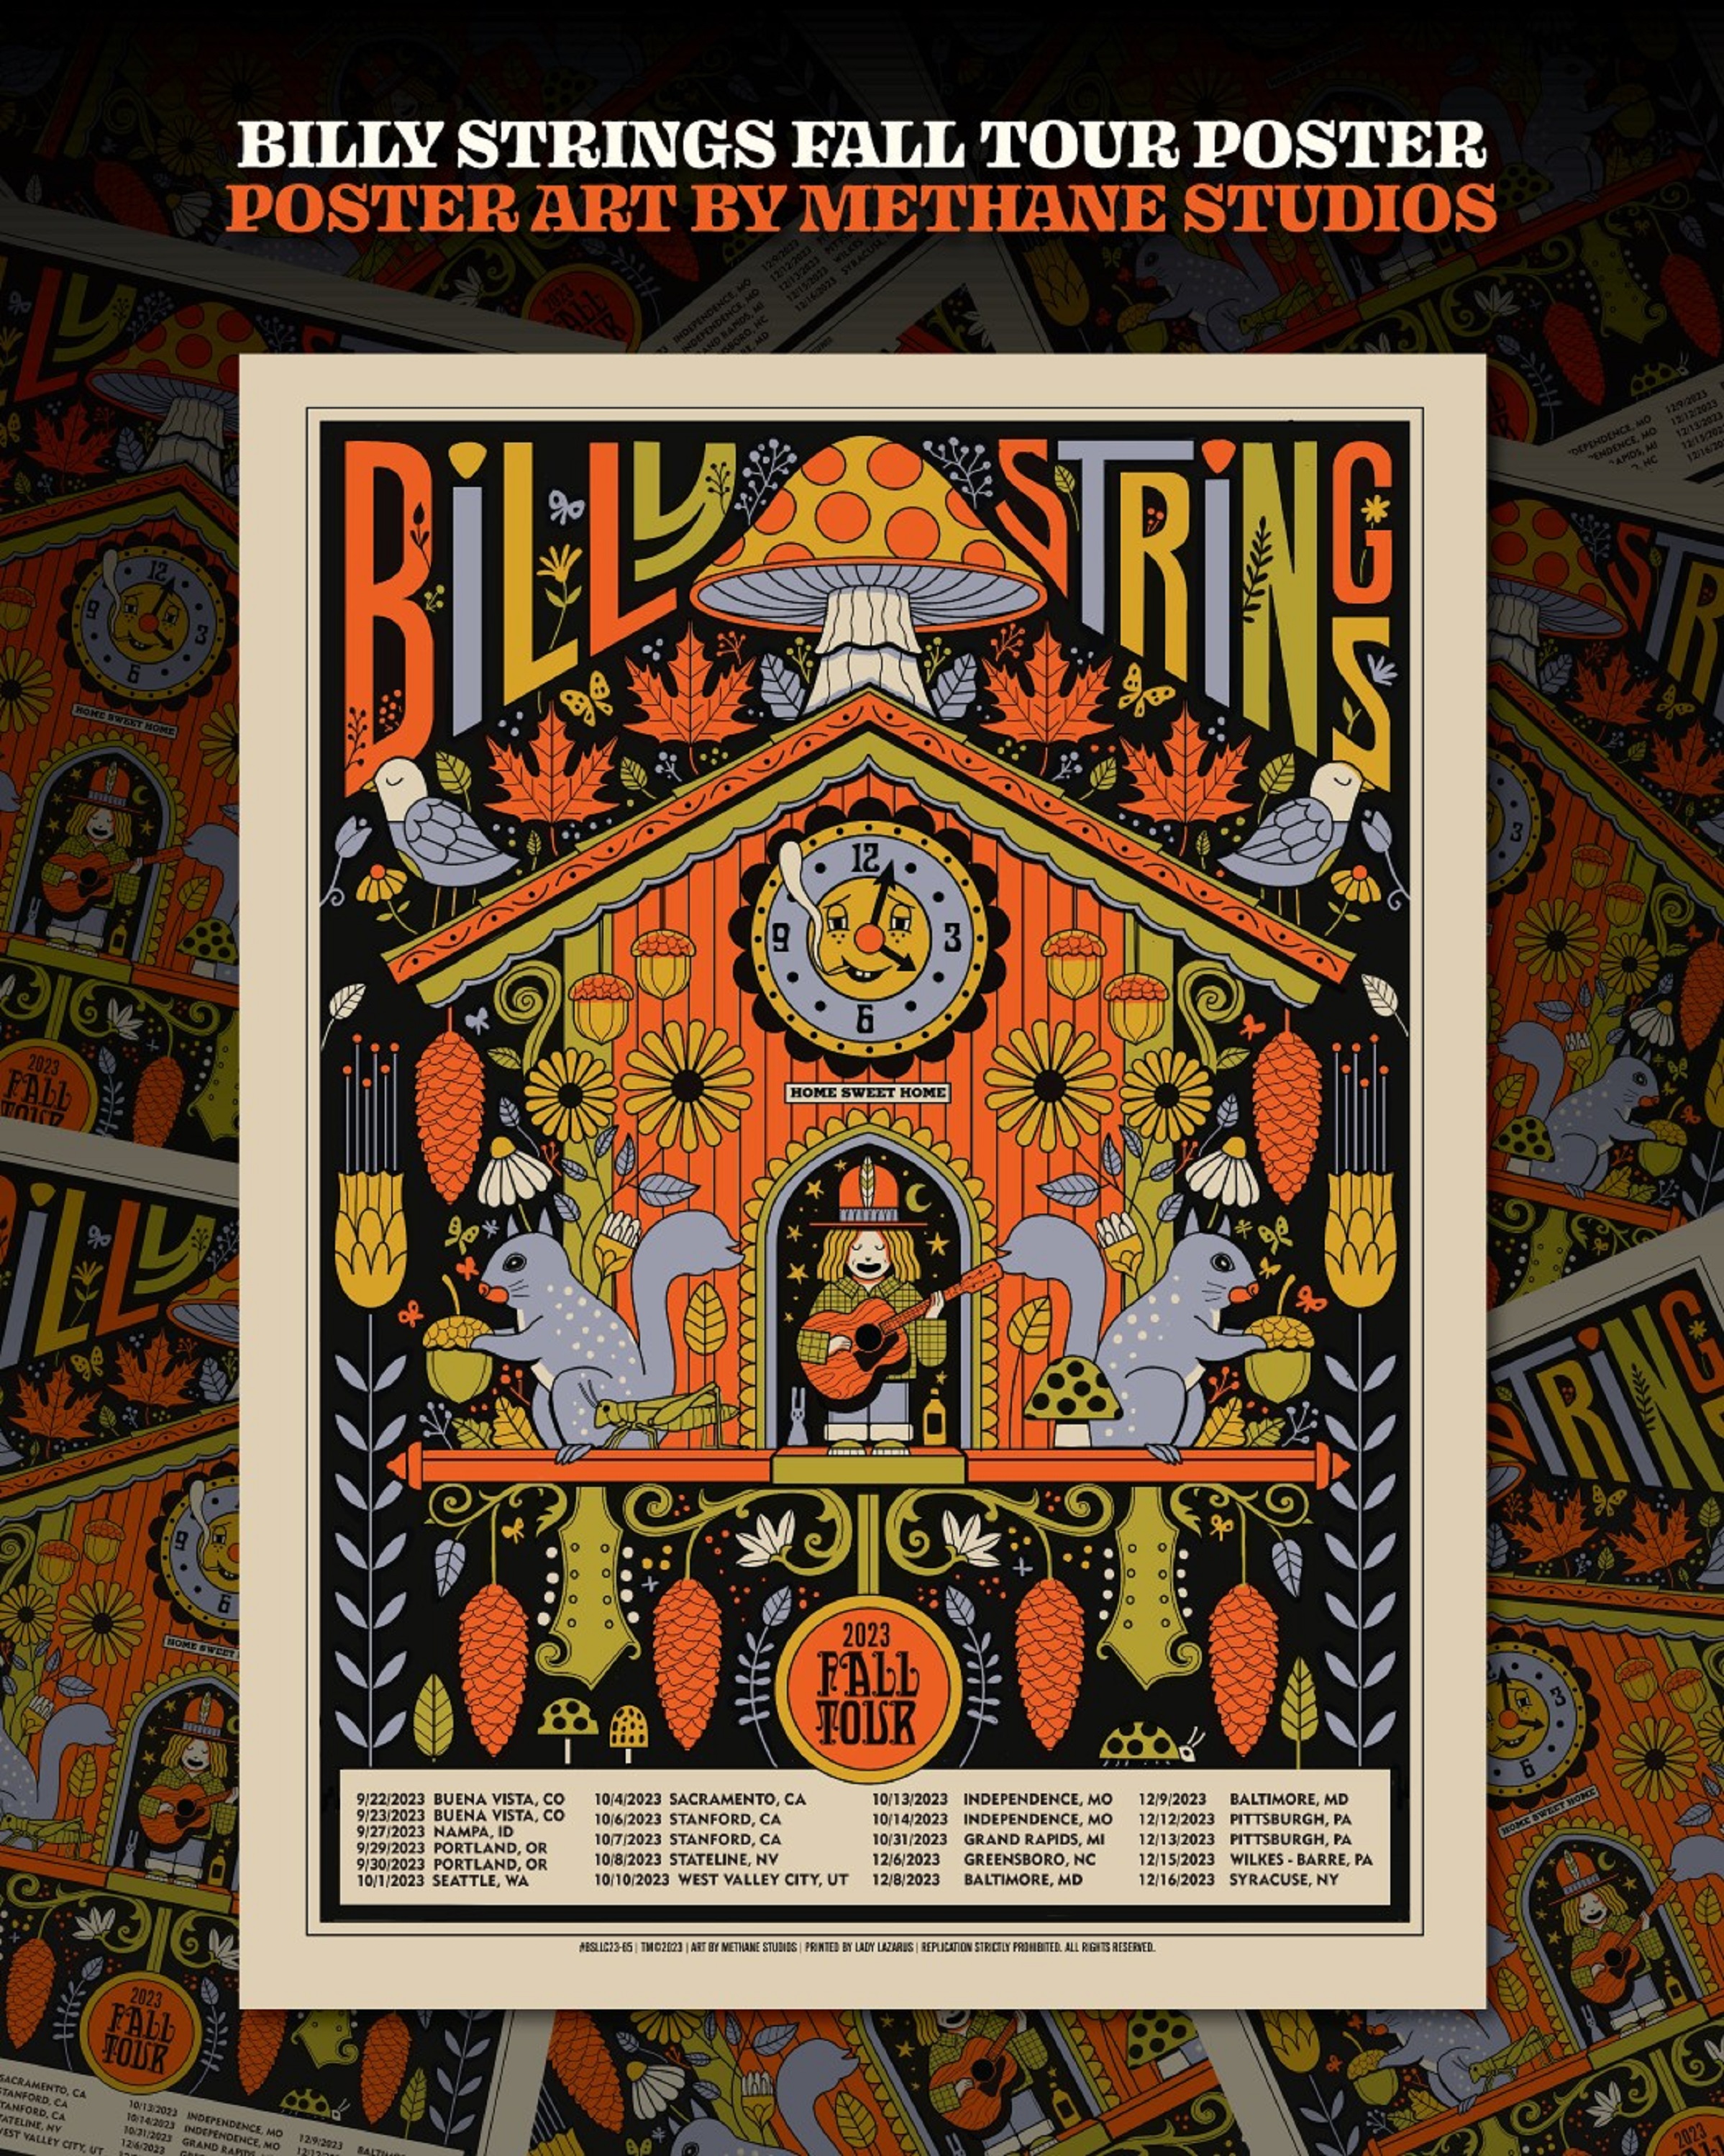 Strumming Through the Seasons: Fall Tour with Billy Strings